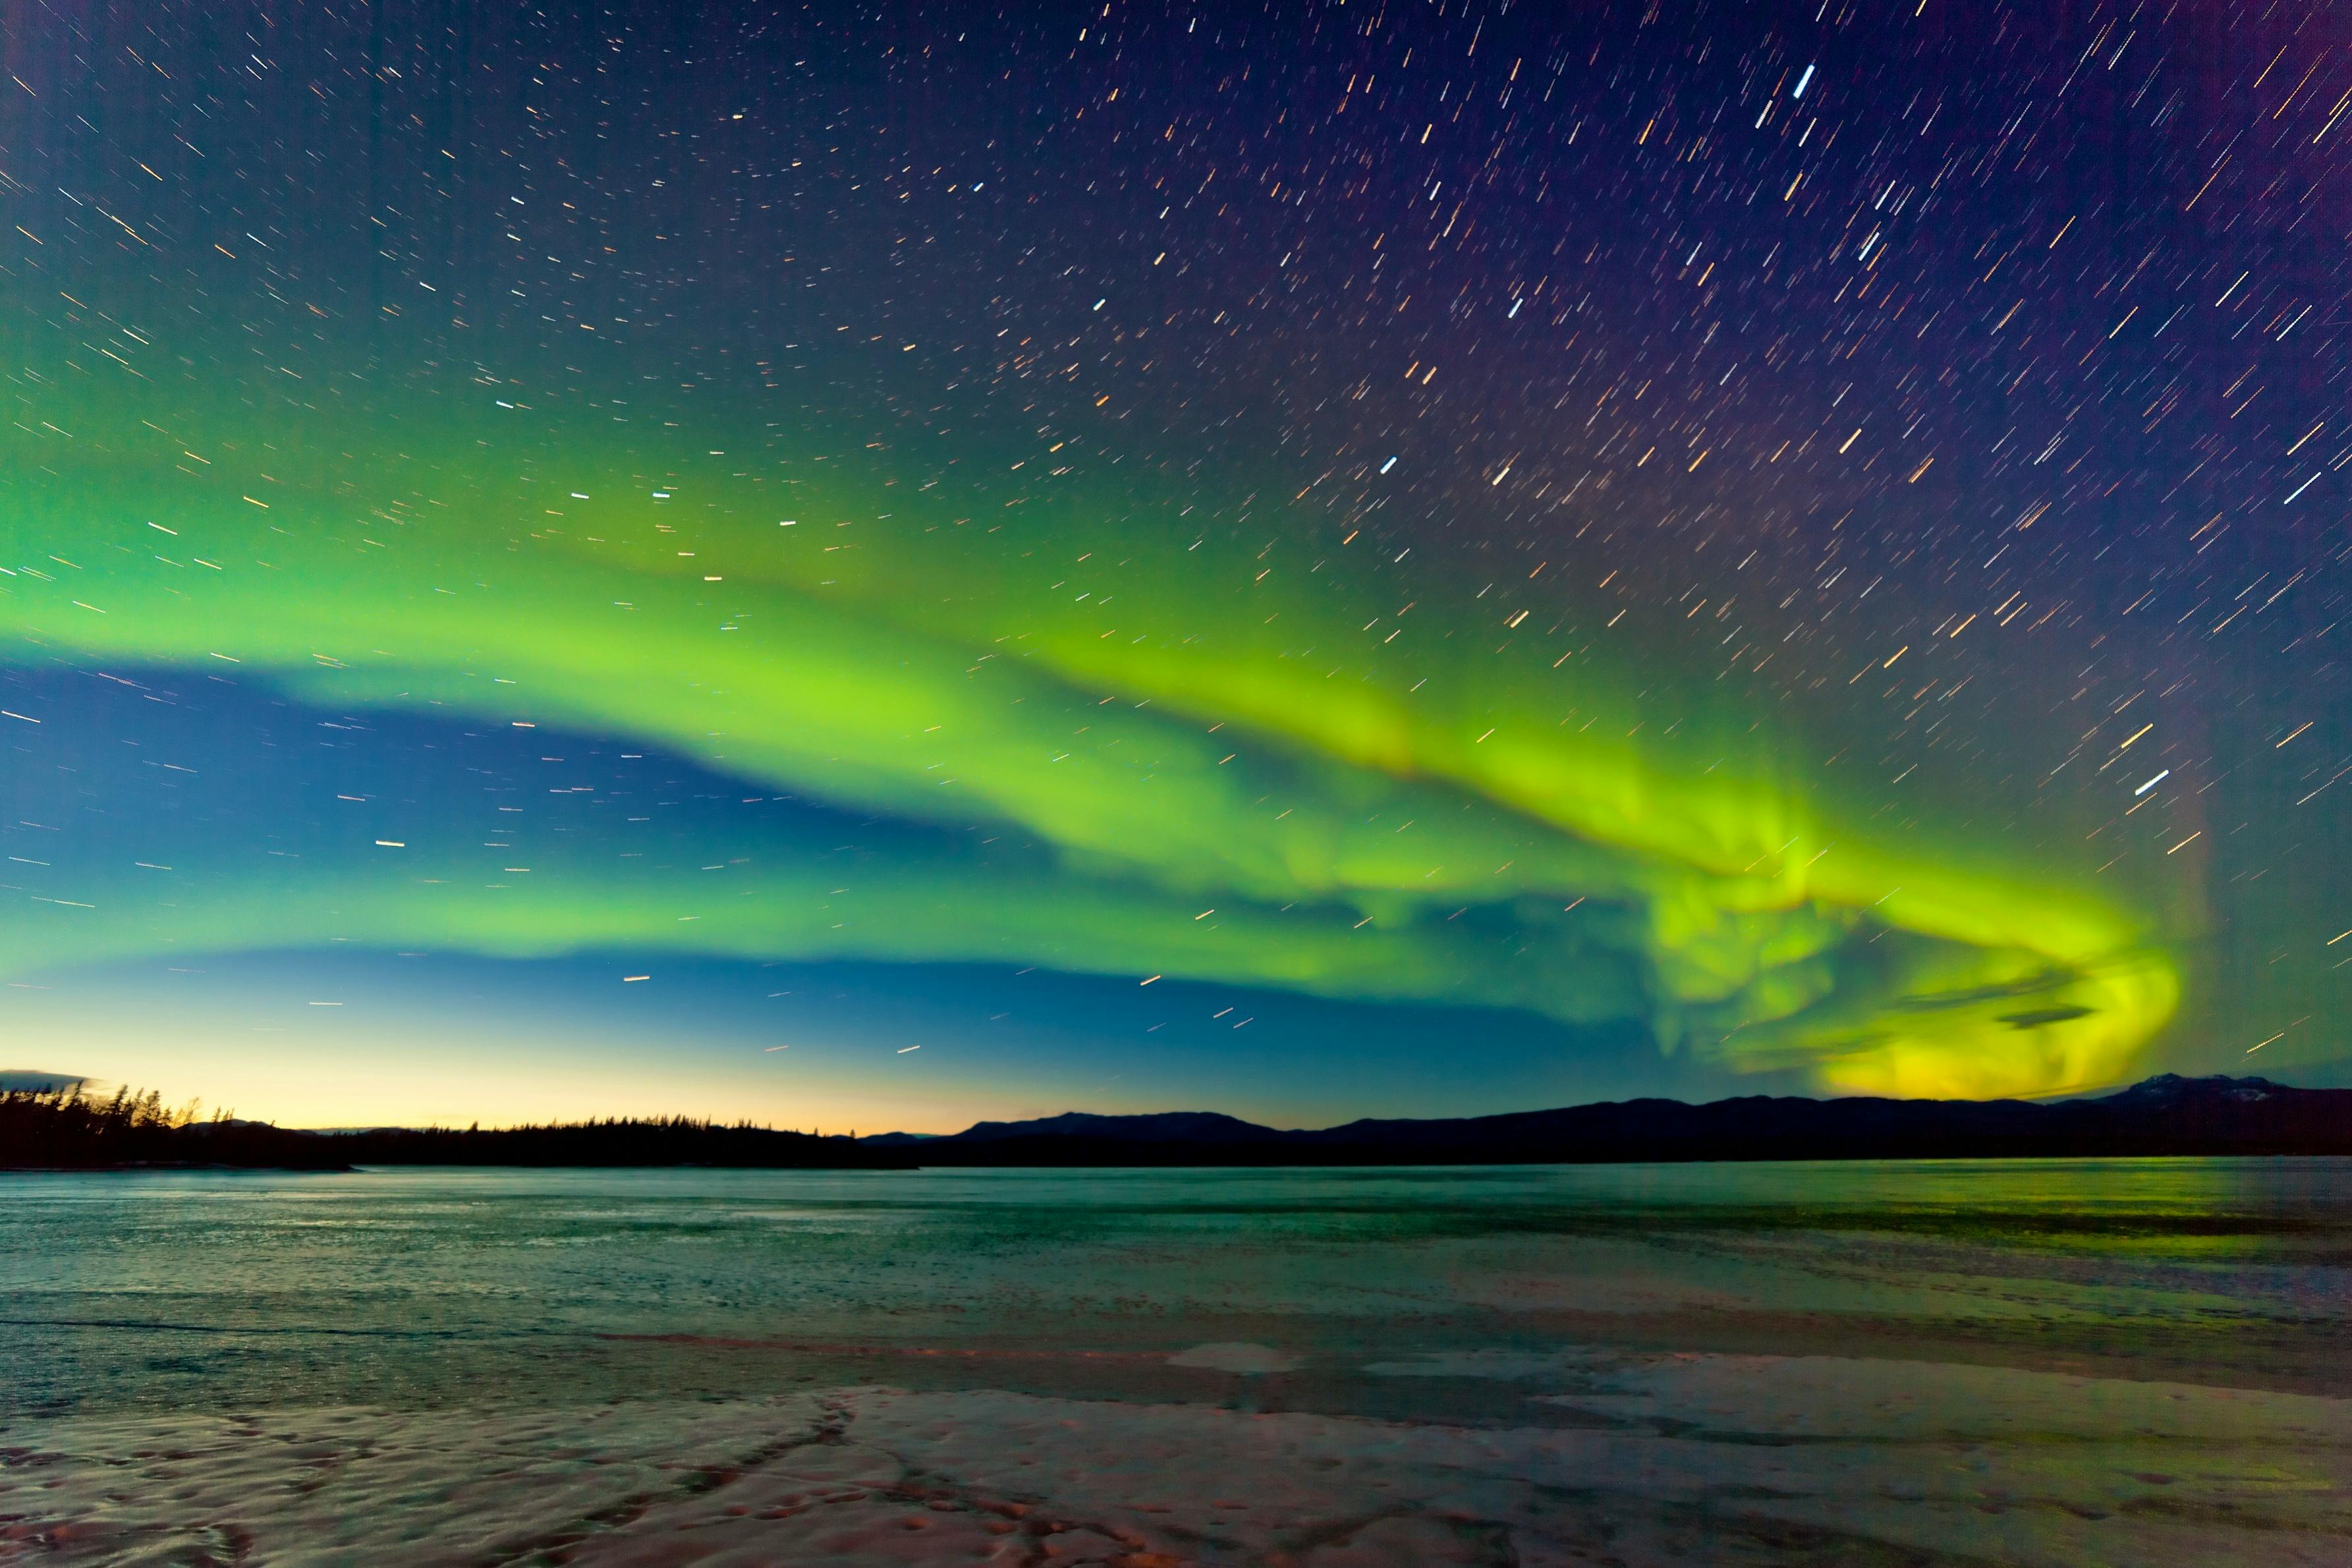 Auroras were visible south of the equator after largest solar storm •